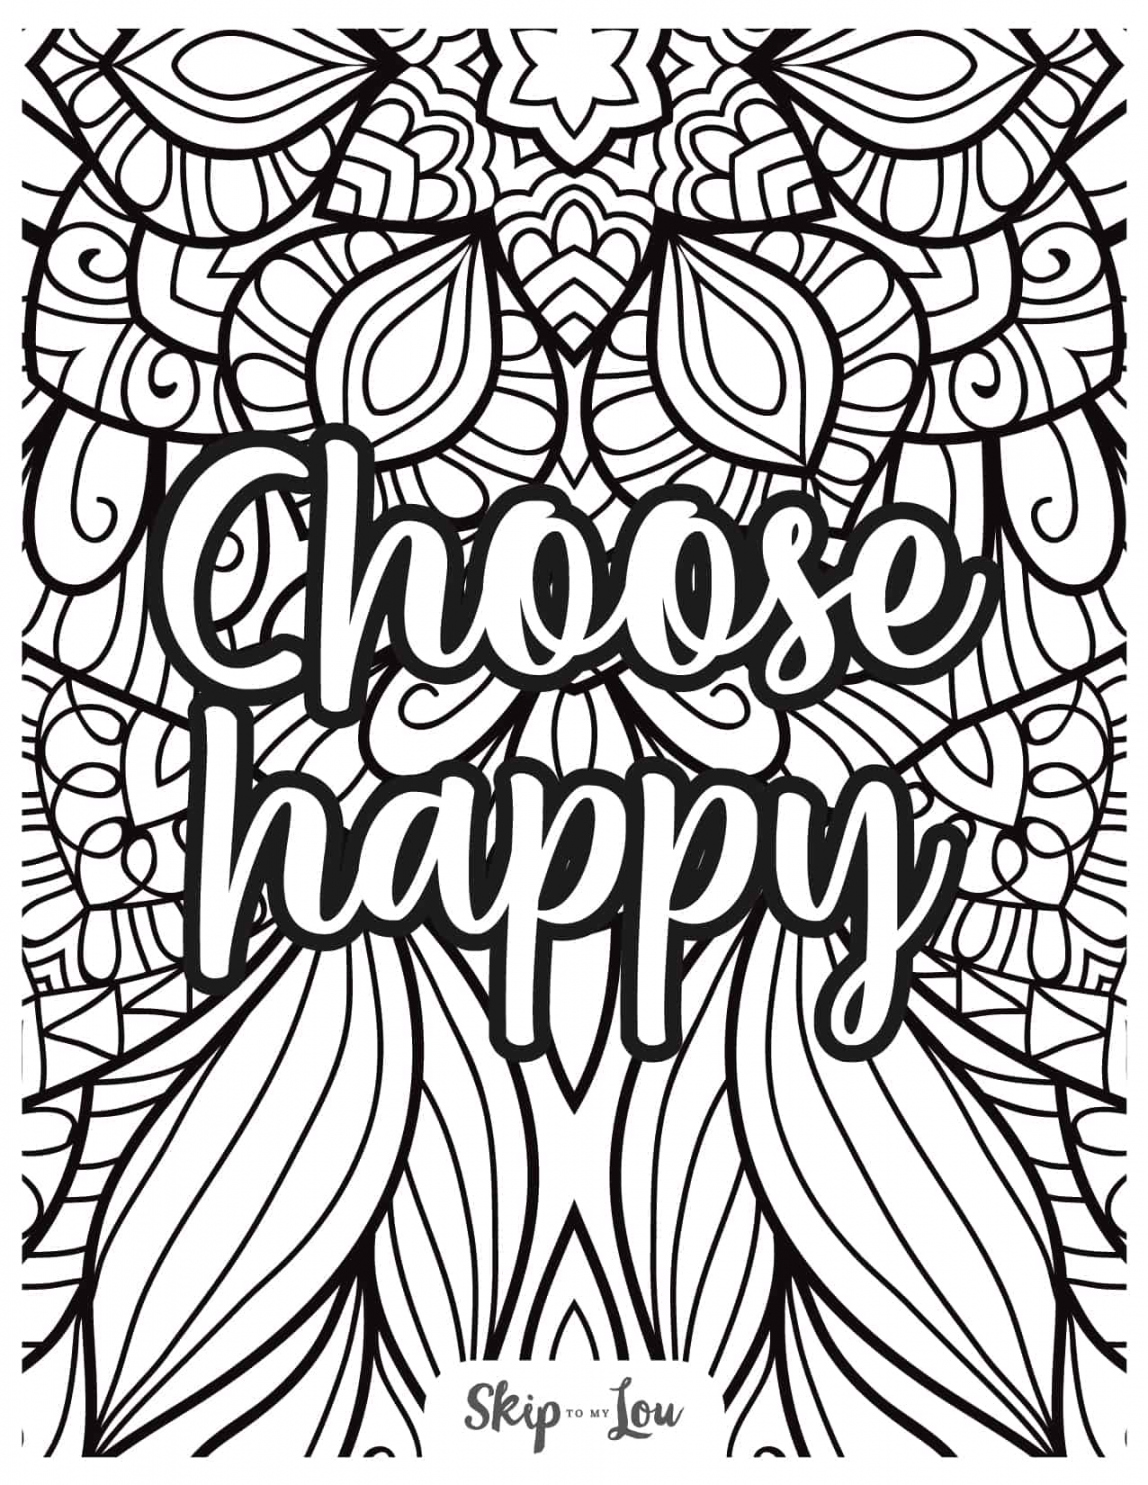 Coloring Sheets Free Printable - Printable - Free Coloring Pages For Adults  Skip To My Lou